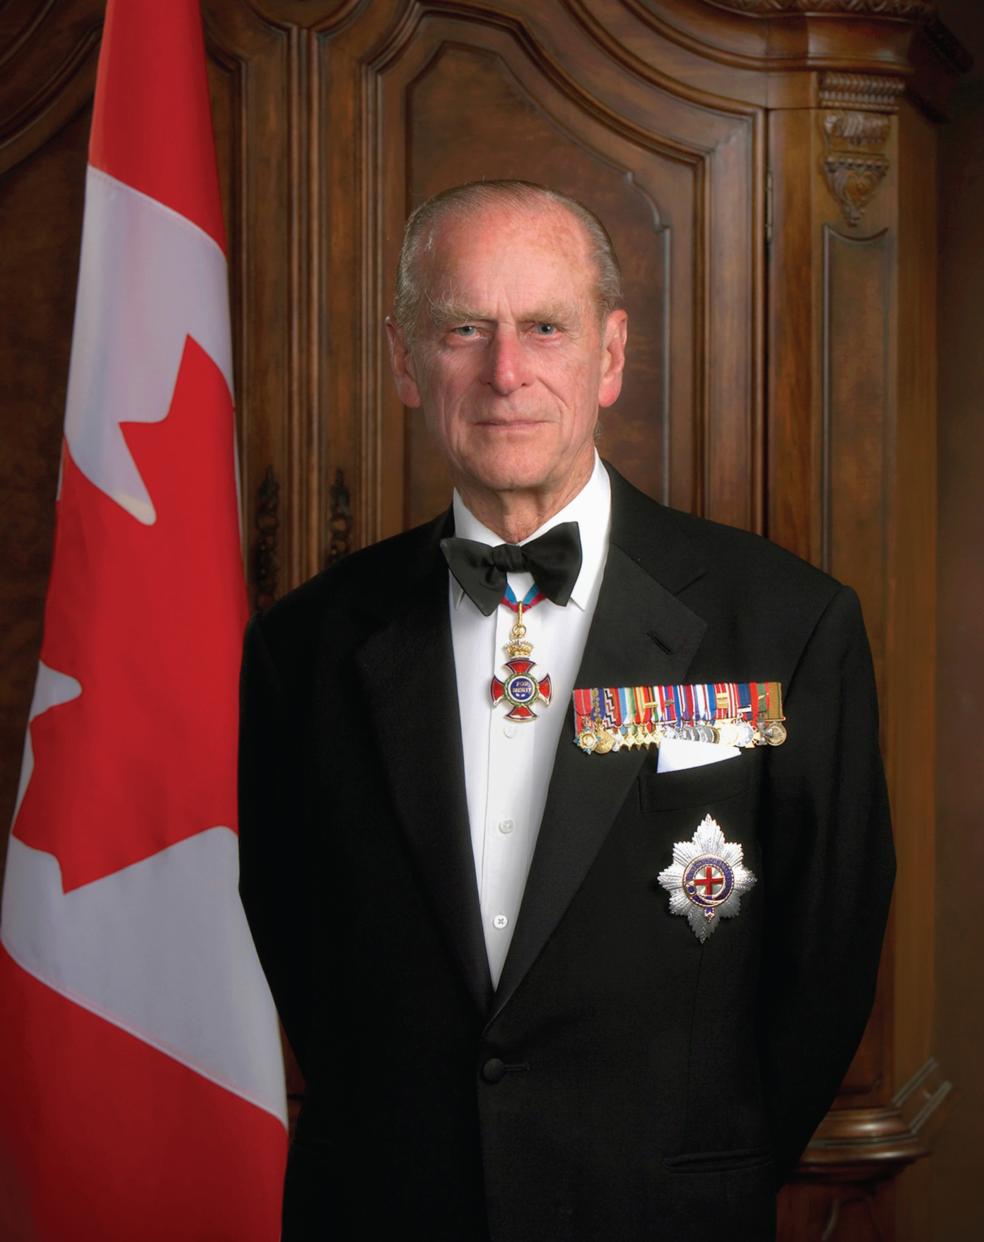 The Official Canadian Portrait of His Royal Highness, The Duke of Edinburgh, 2005